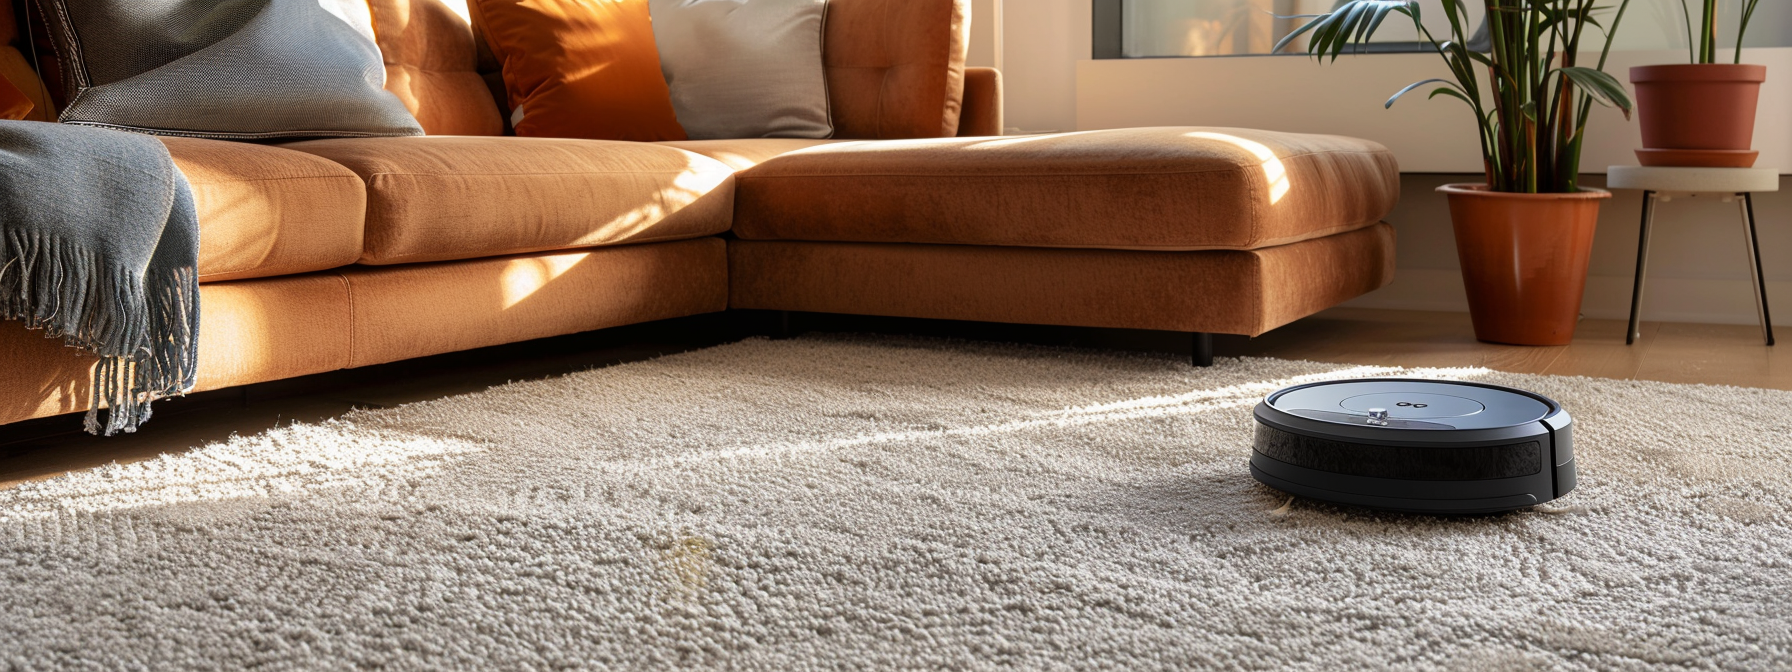 Innovative Carpet Care Technologies: From Smart Vacuums to Eco-Friendly Cleaners